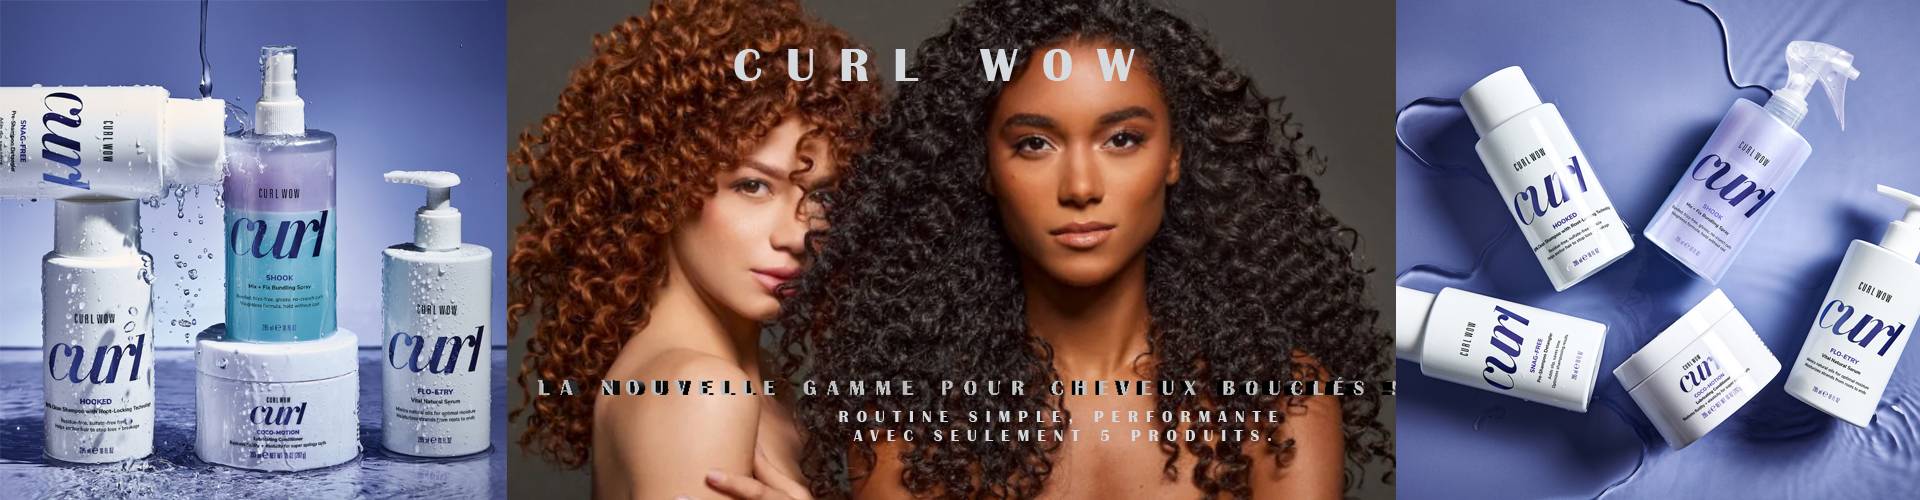 Curl Wow| Gamme Boucles